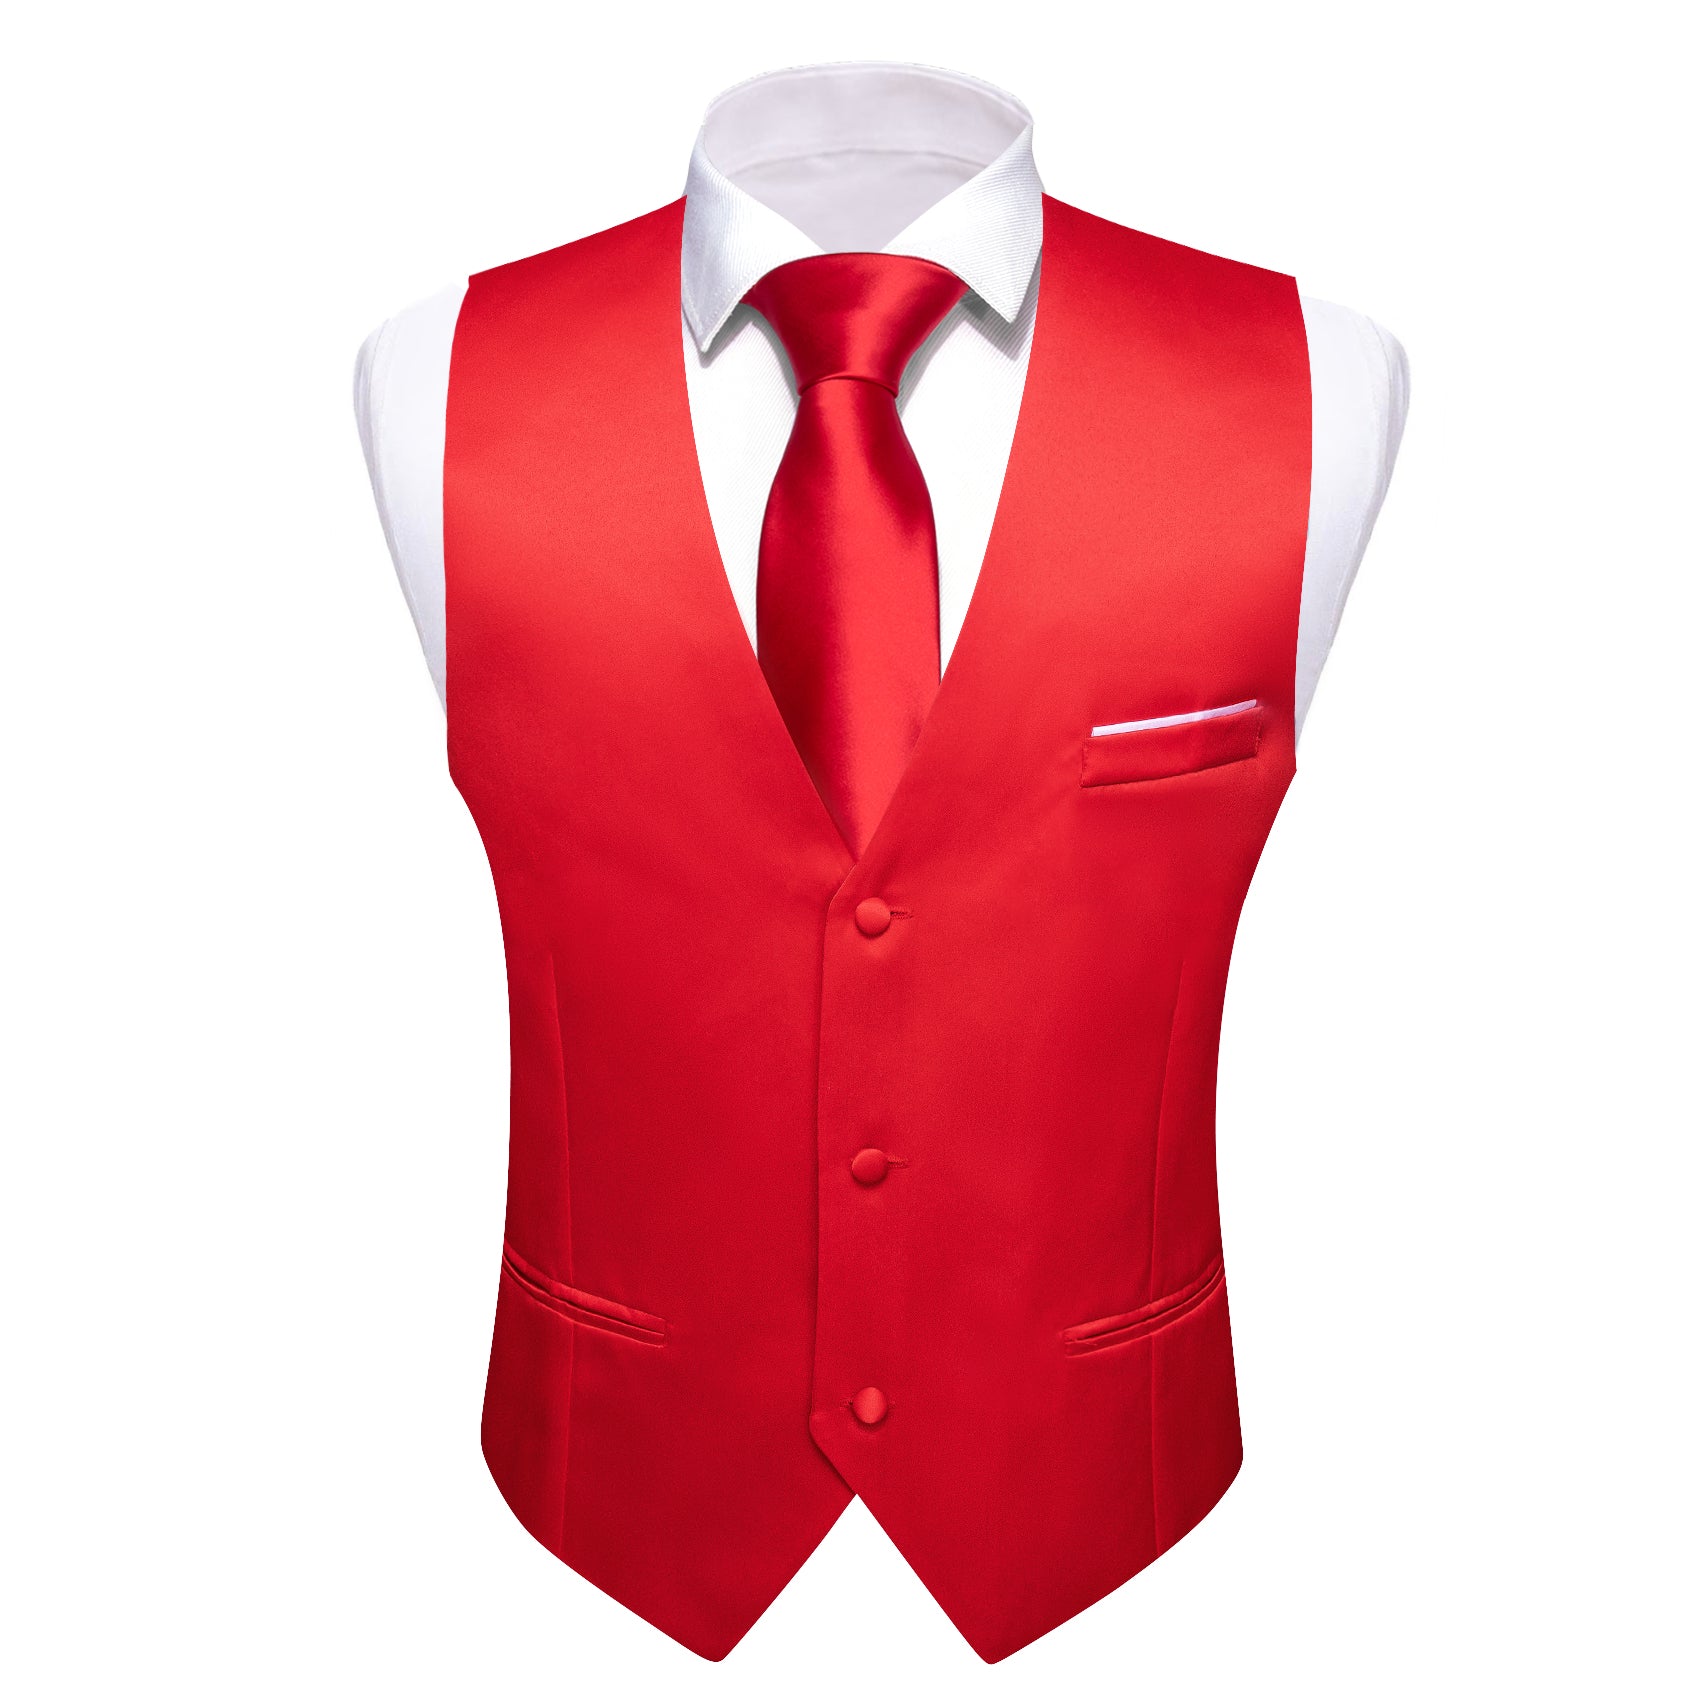 Barry.wang Red Solid Business Vest Suit